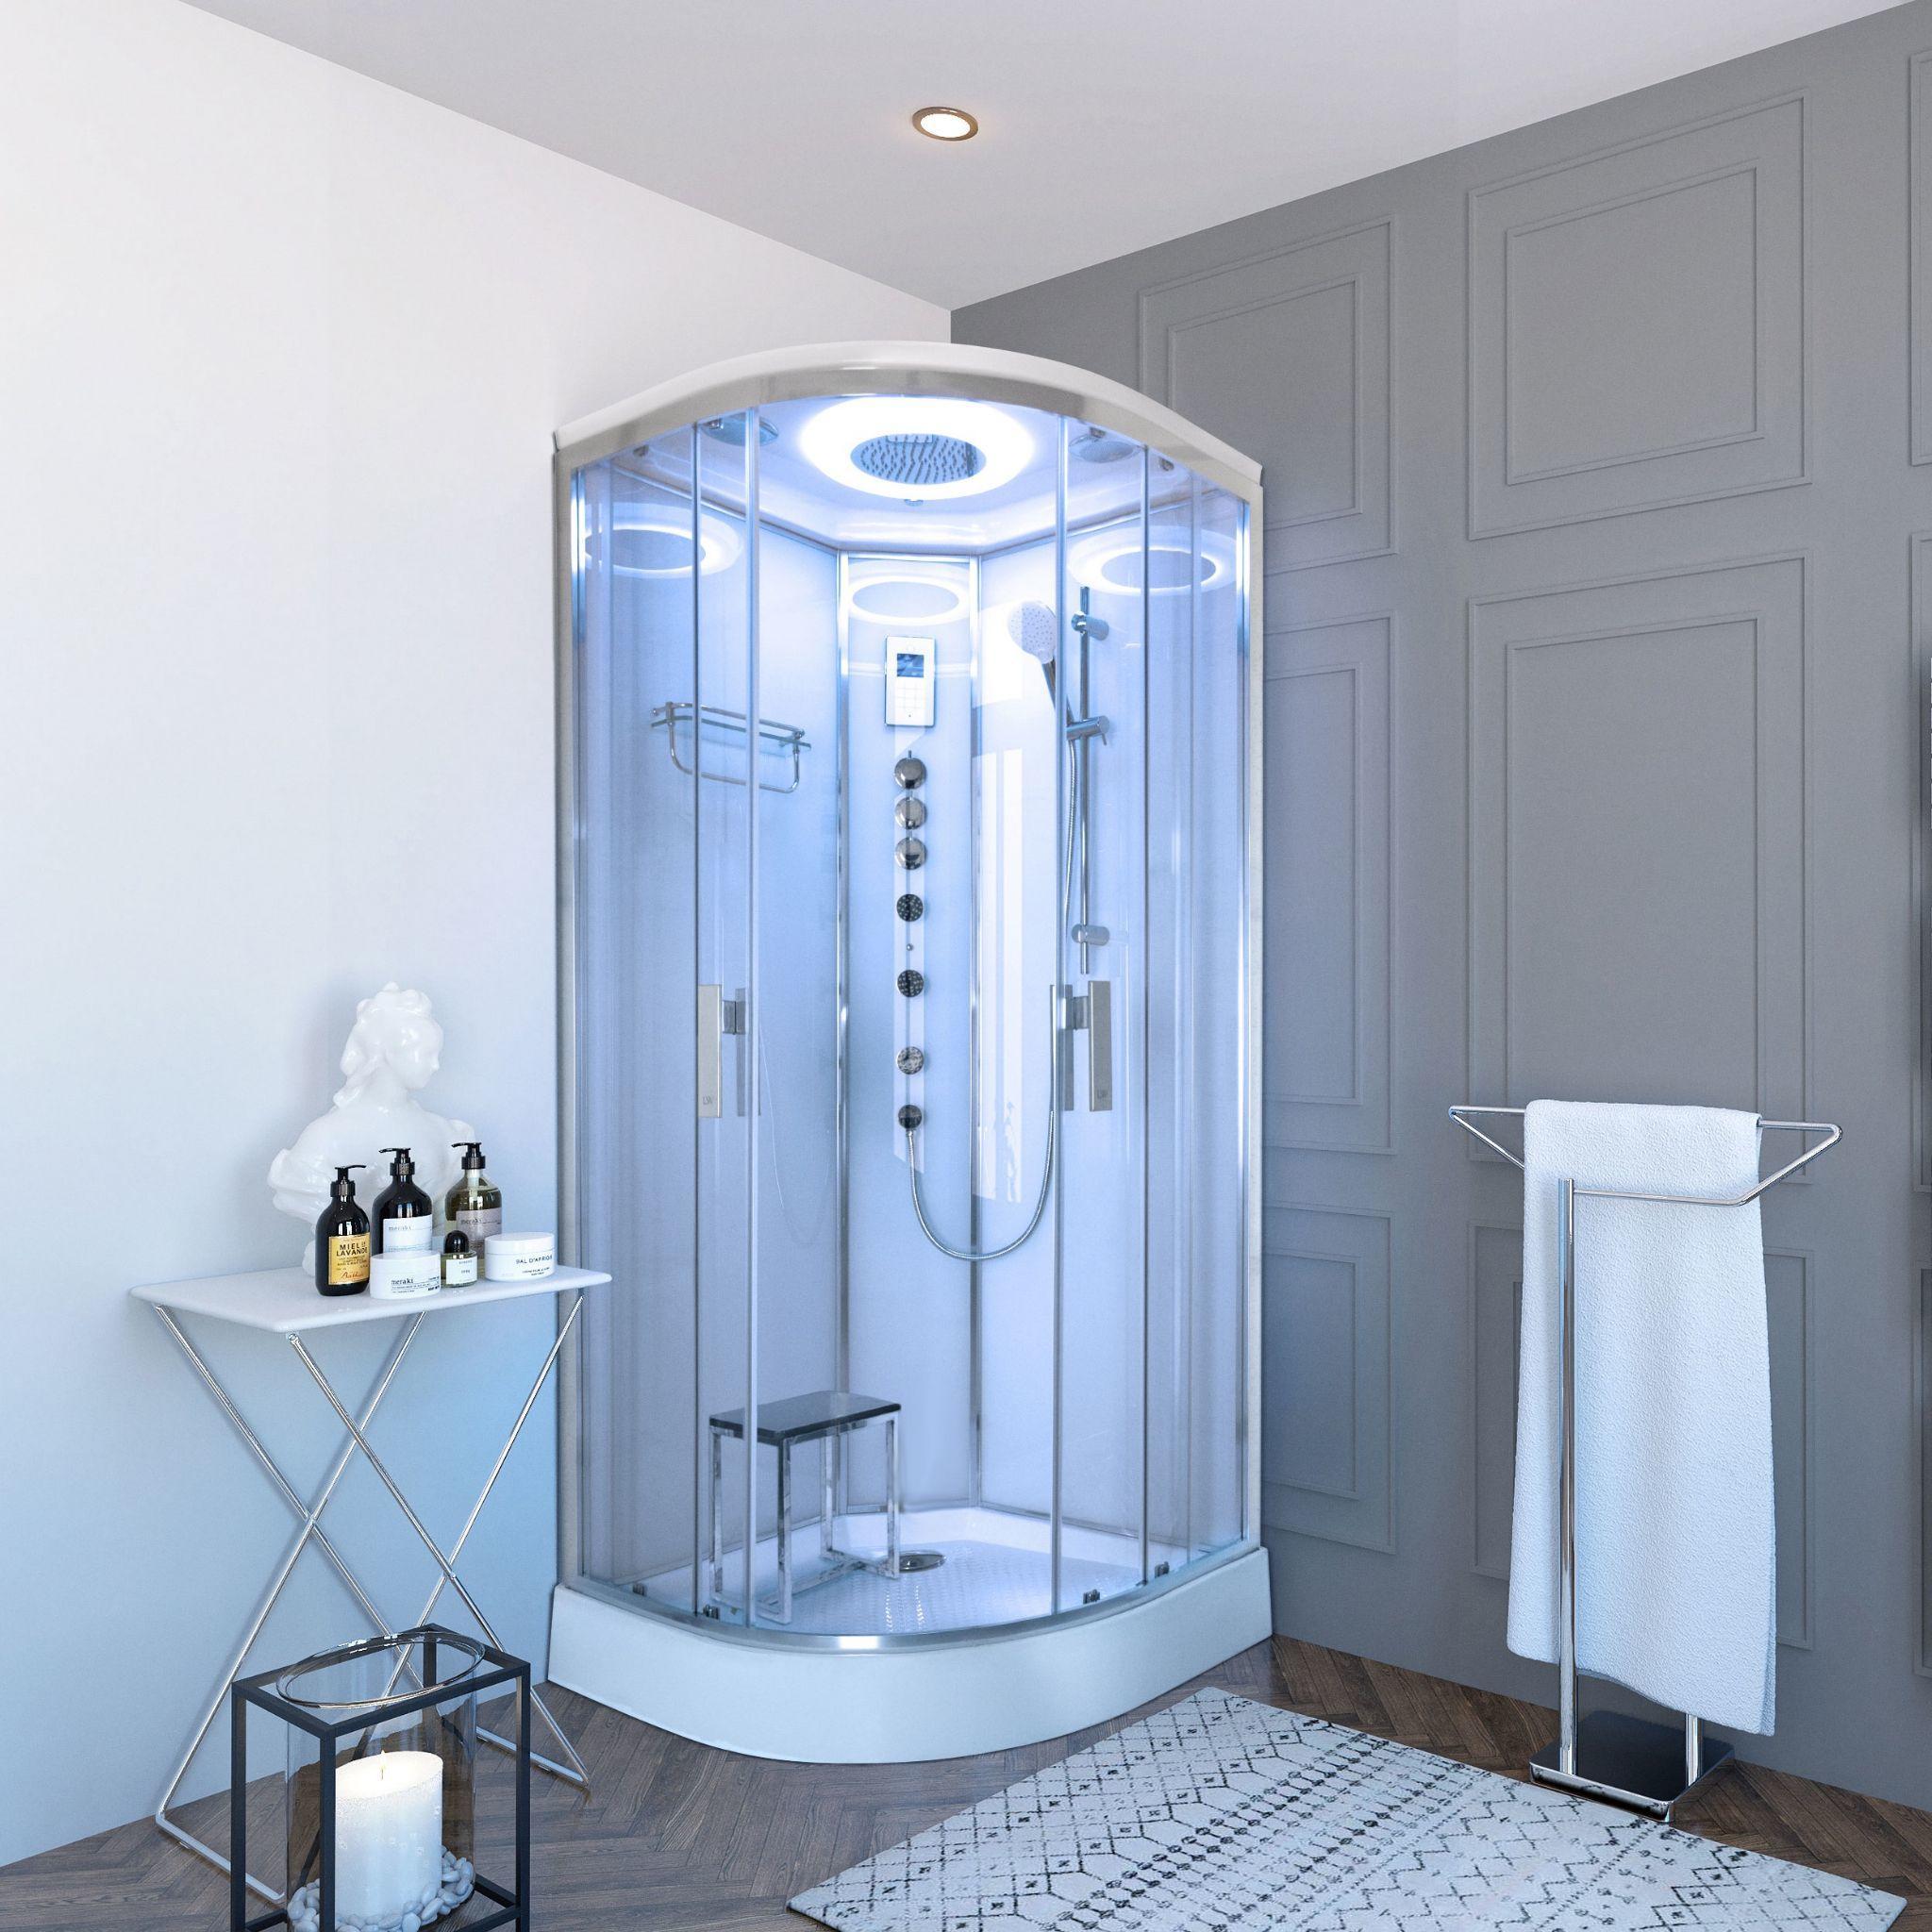 An image of Lisna Waters Mayfair-Au 800Mm X 800Mm Hydro Shower Cabin Tmv2 Thermostatic Appro...